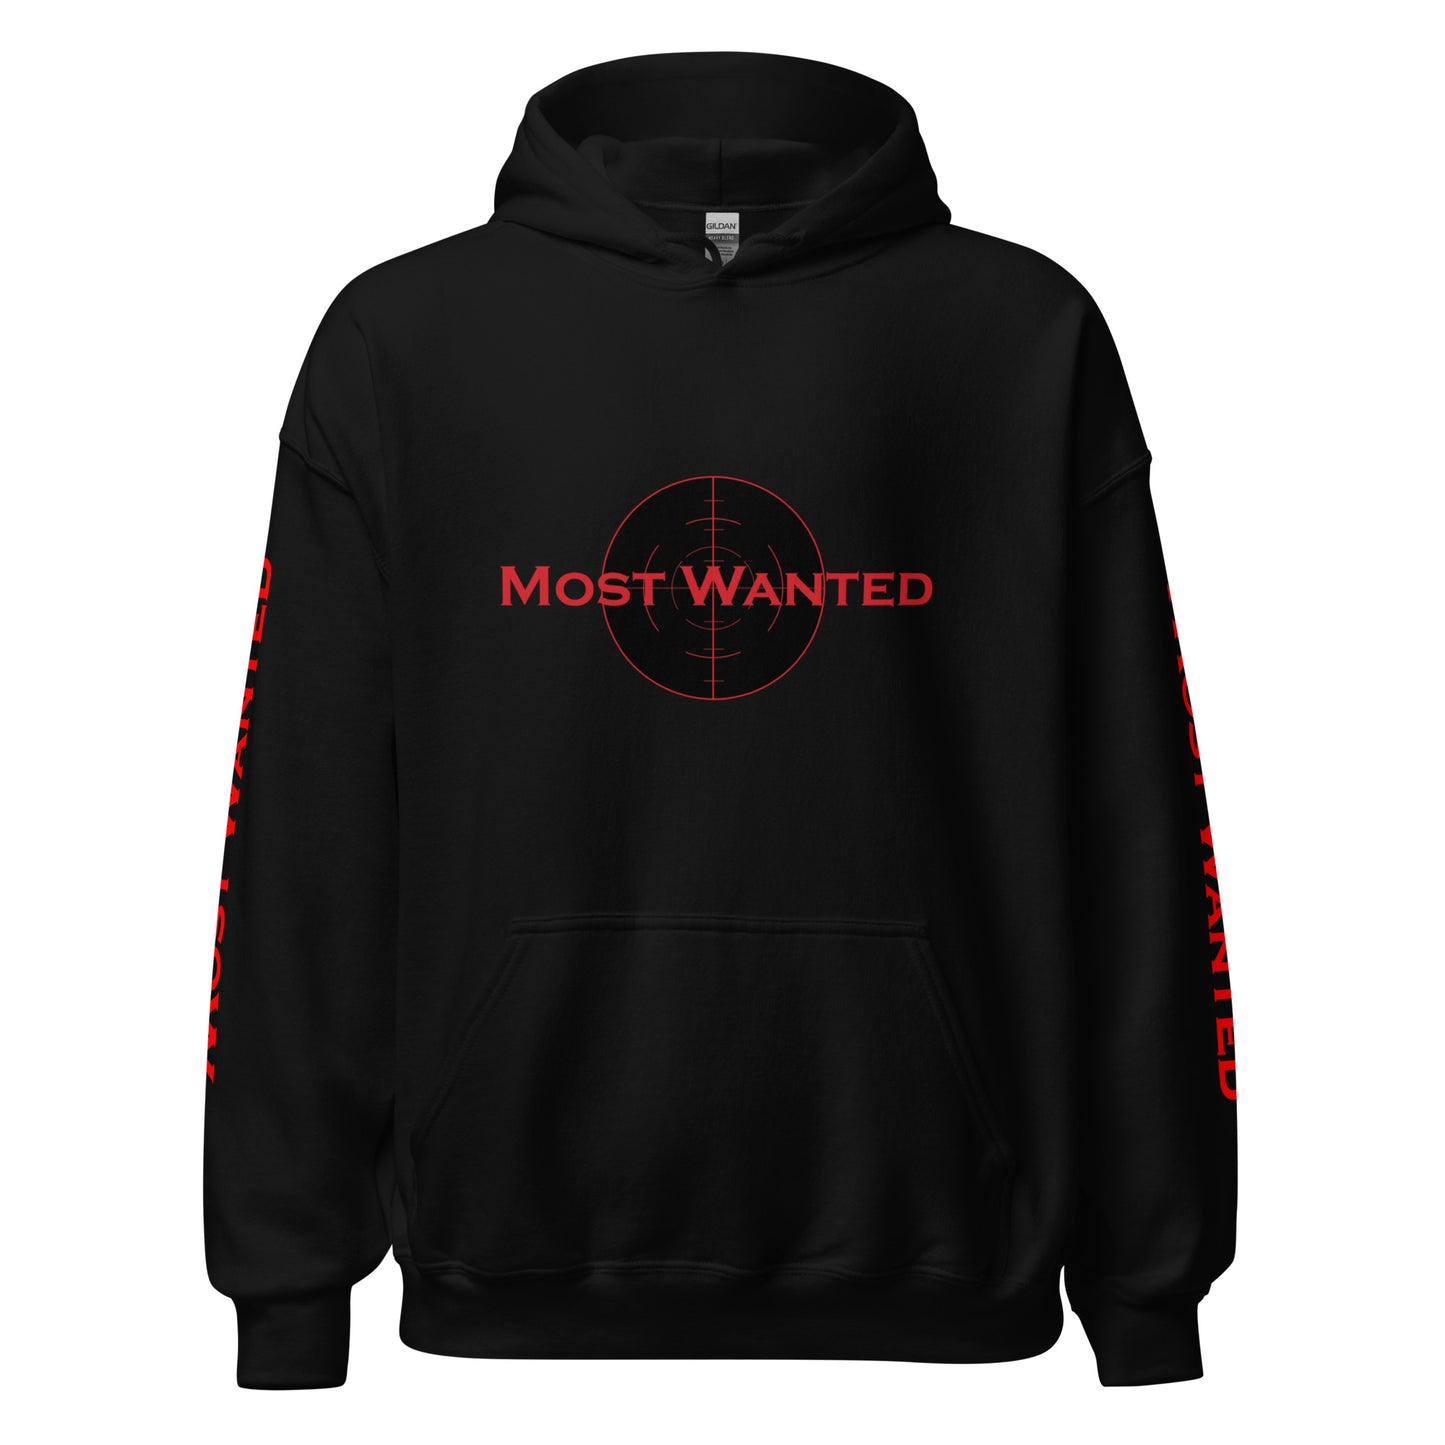 MOST WANTED WHITE OG HOODIE #3 ⭐⭐